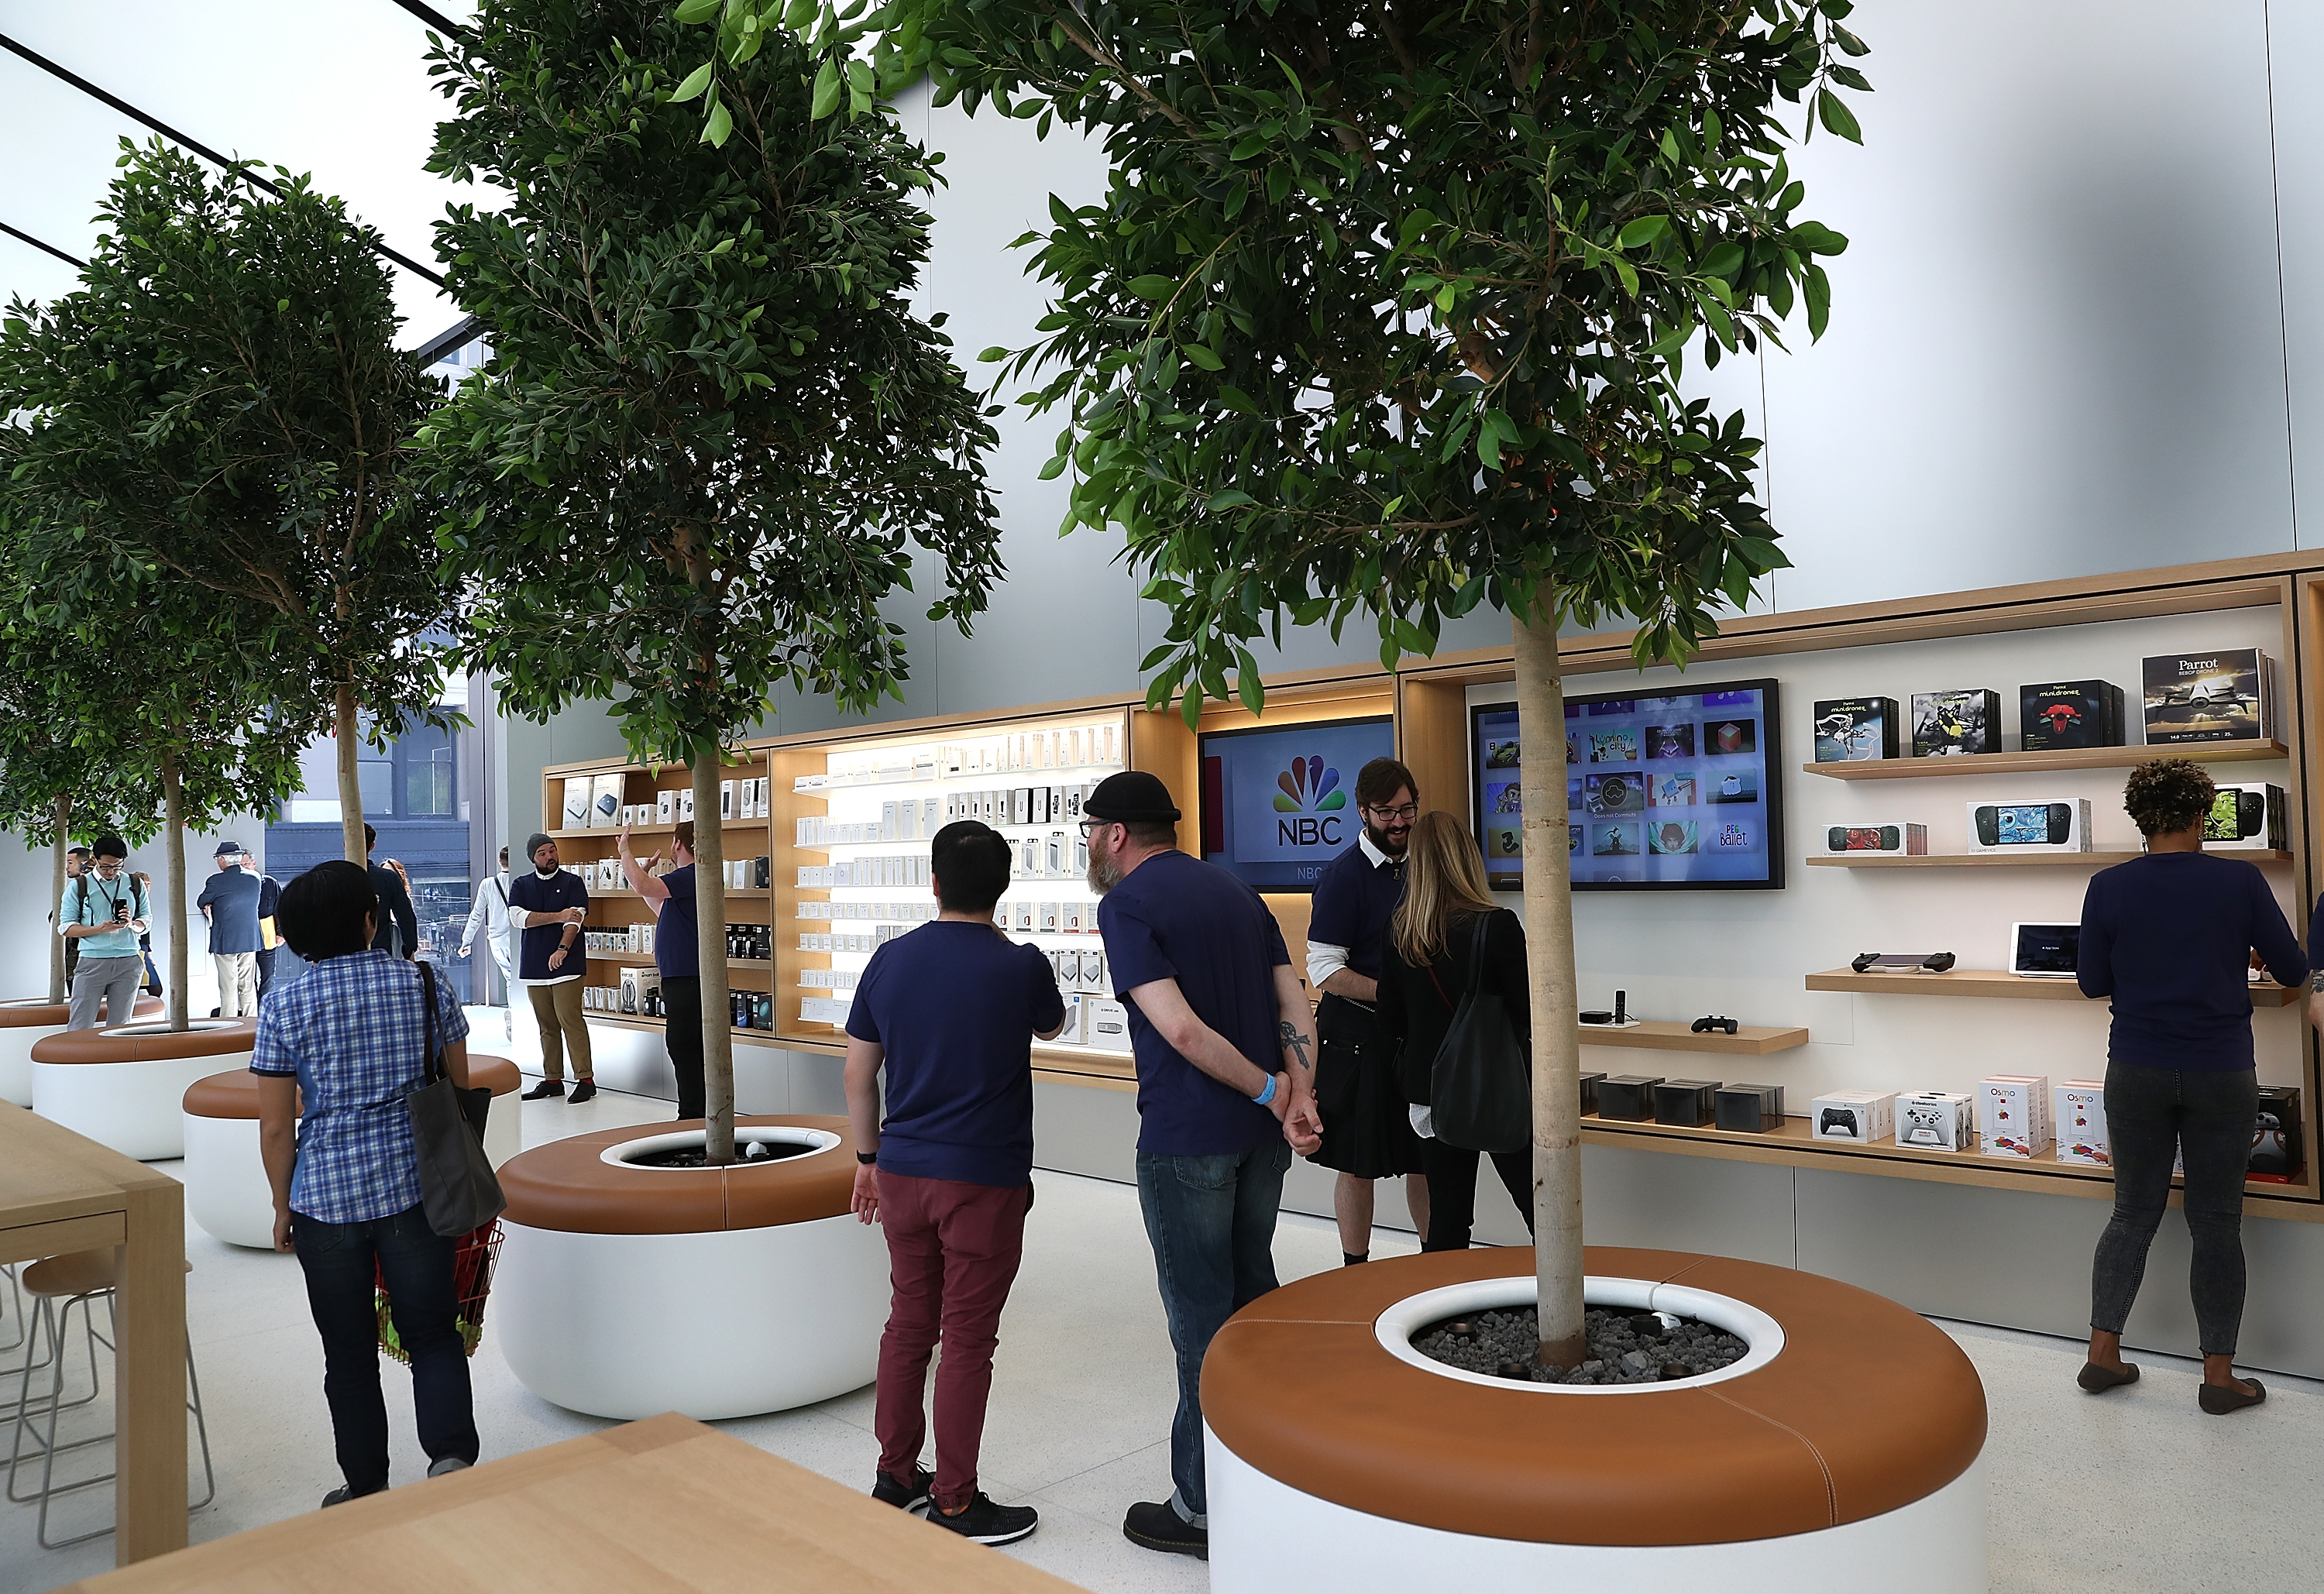 Members of media tour the "Genius Grove" during a press preview of the new flagship Apple Store on May 19, 2016 in San Francisco, California. (Justin Sullivan&mdash;Getty Images)